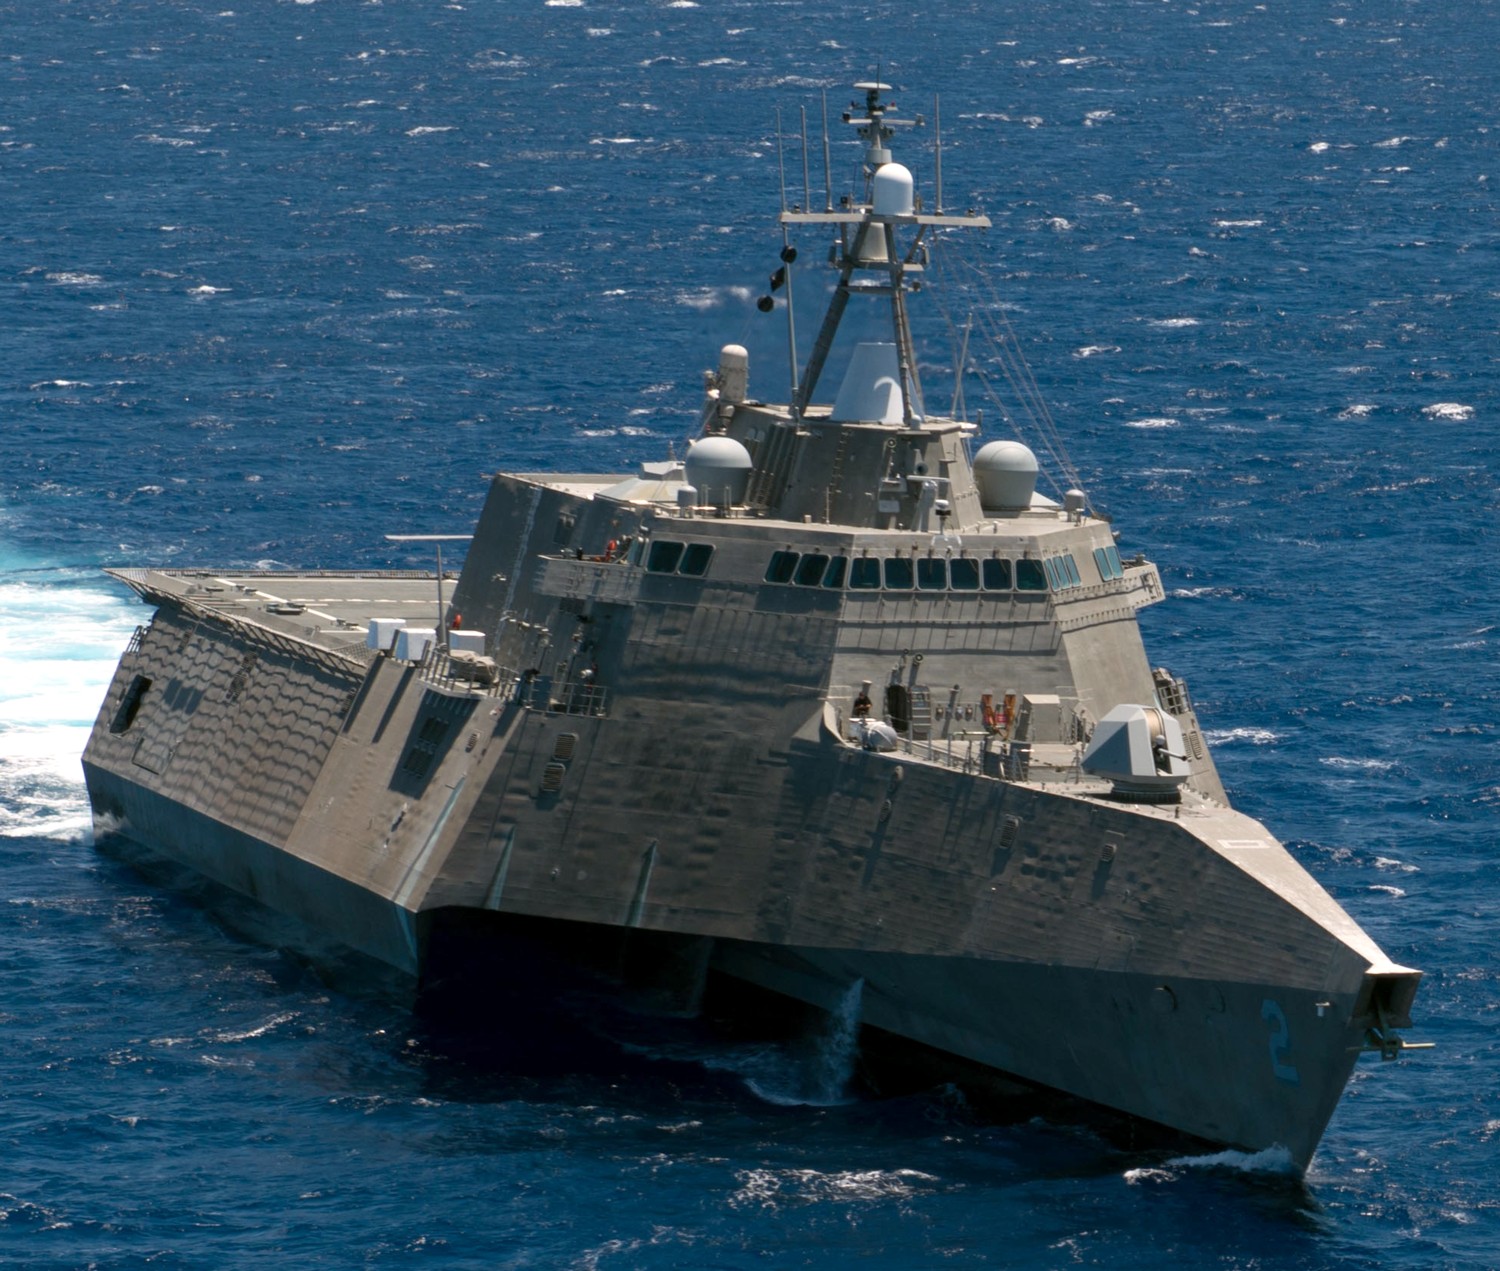 lcs-2 uss independence littoral combat ship us navy class 09a